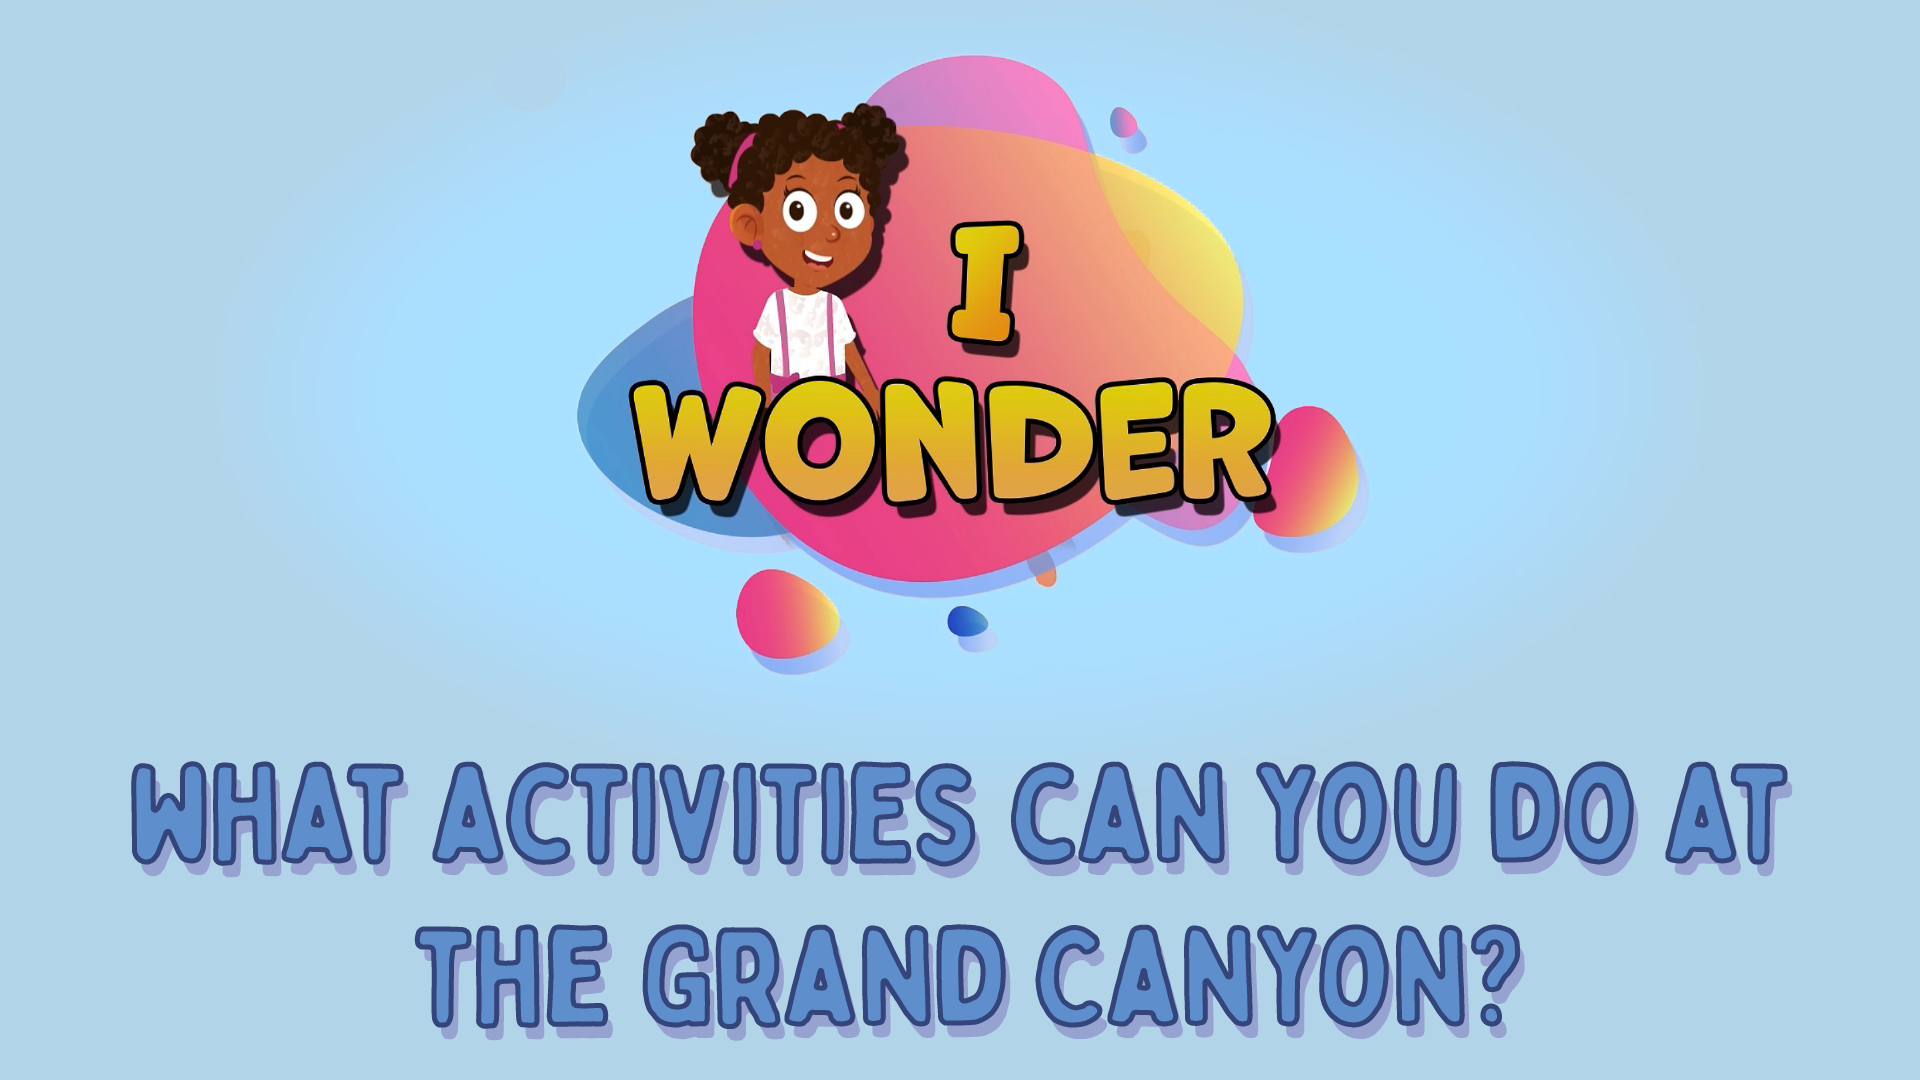 What Activities Can You Do At The Grand Canyon?